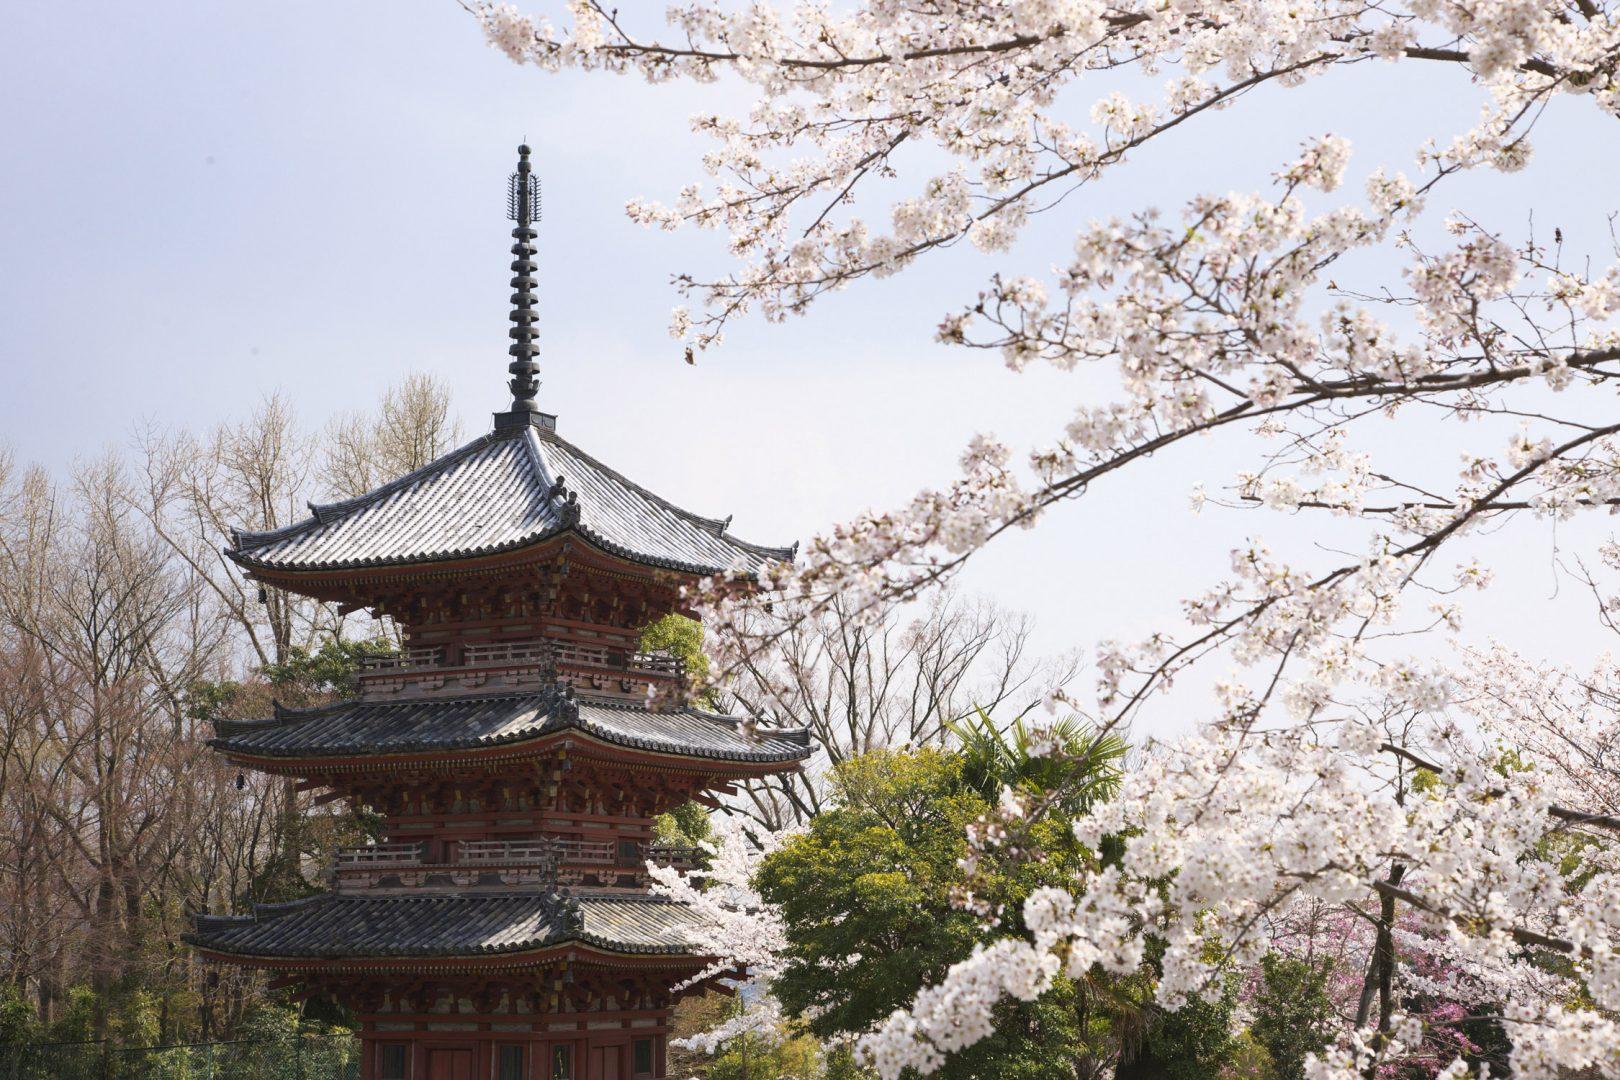 Japanese culture practices Sakura, a tradition in which the end of winter is celebrated in the midst of flowering cherry trees. (Courtesy of Suntory Whisky/MCT)